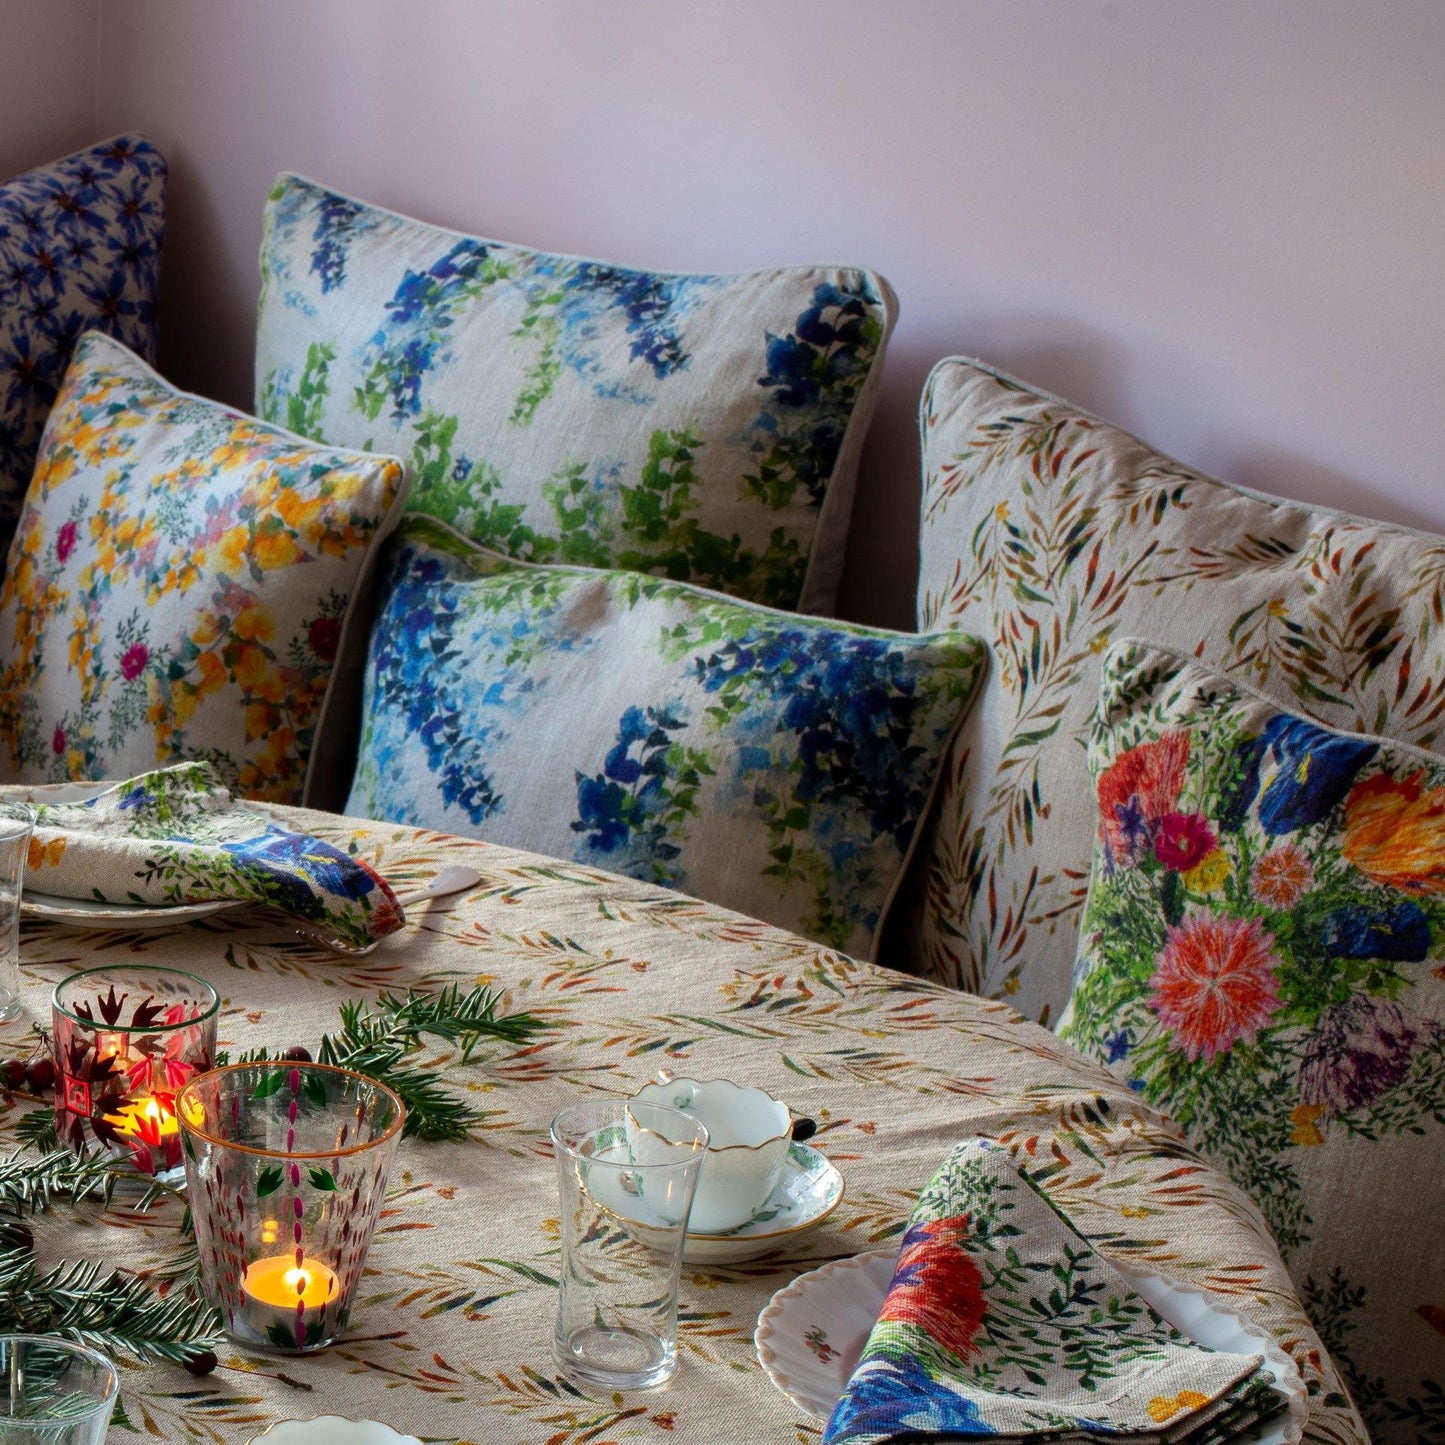 Colorful floral print linen pillow covers on kitchen banquette.